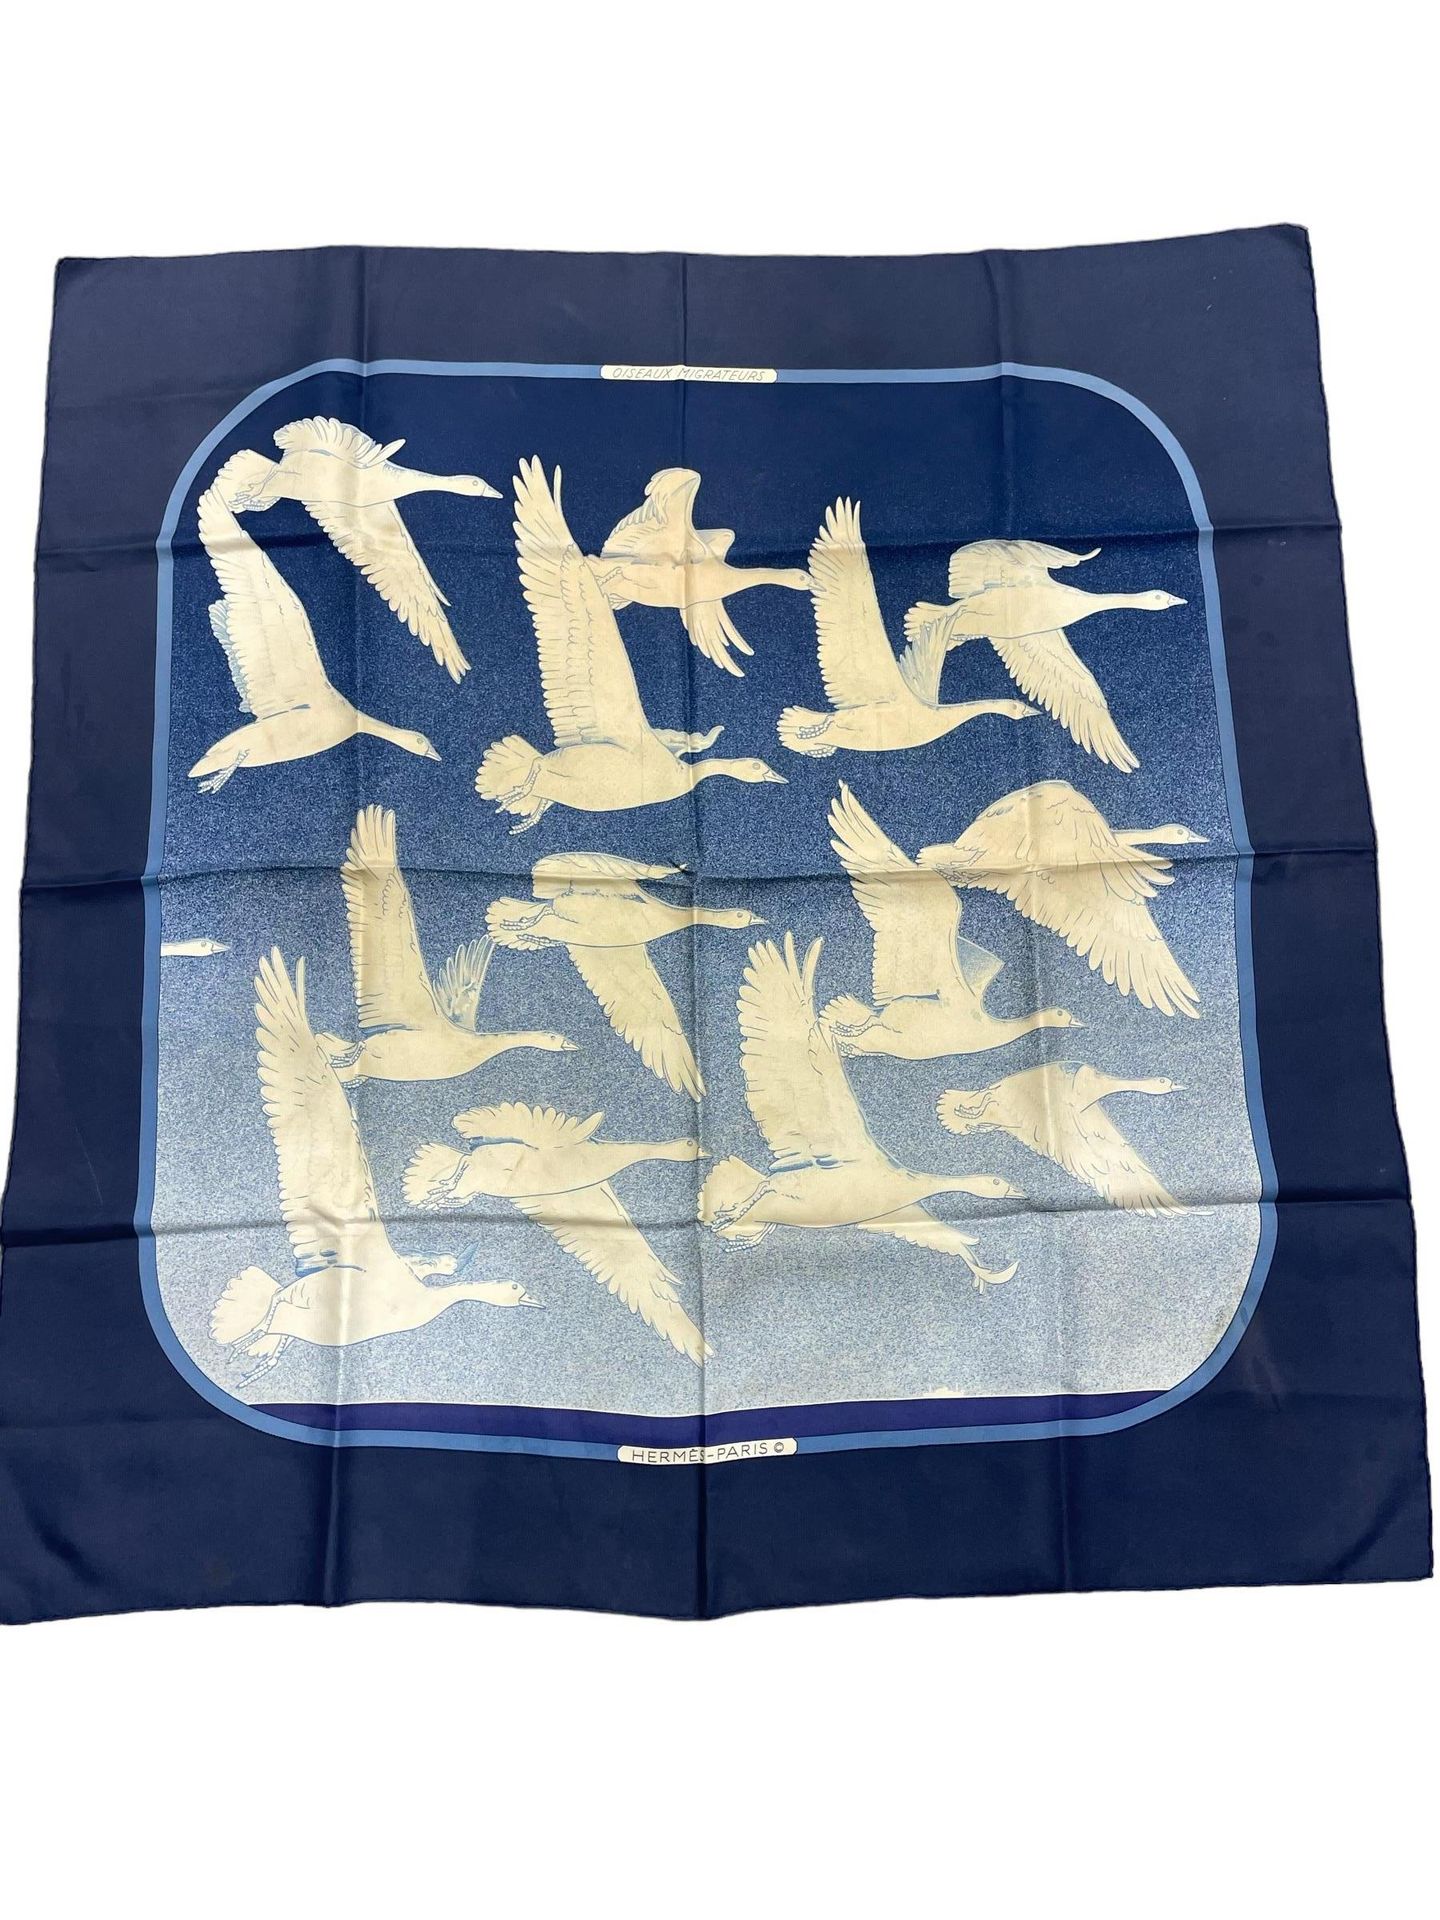 Null HERMES Paris made in France - CARRE in silk twill entitled "Oiseaux migrate&hellip;